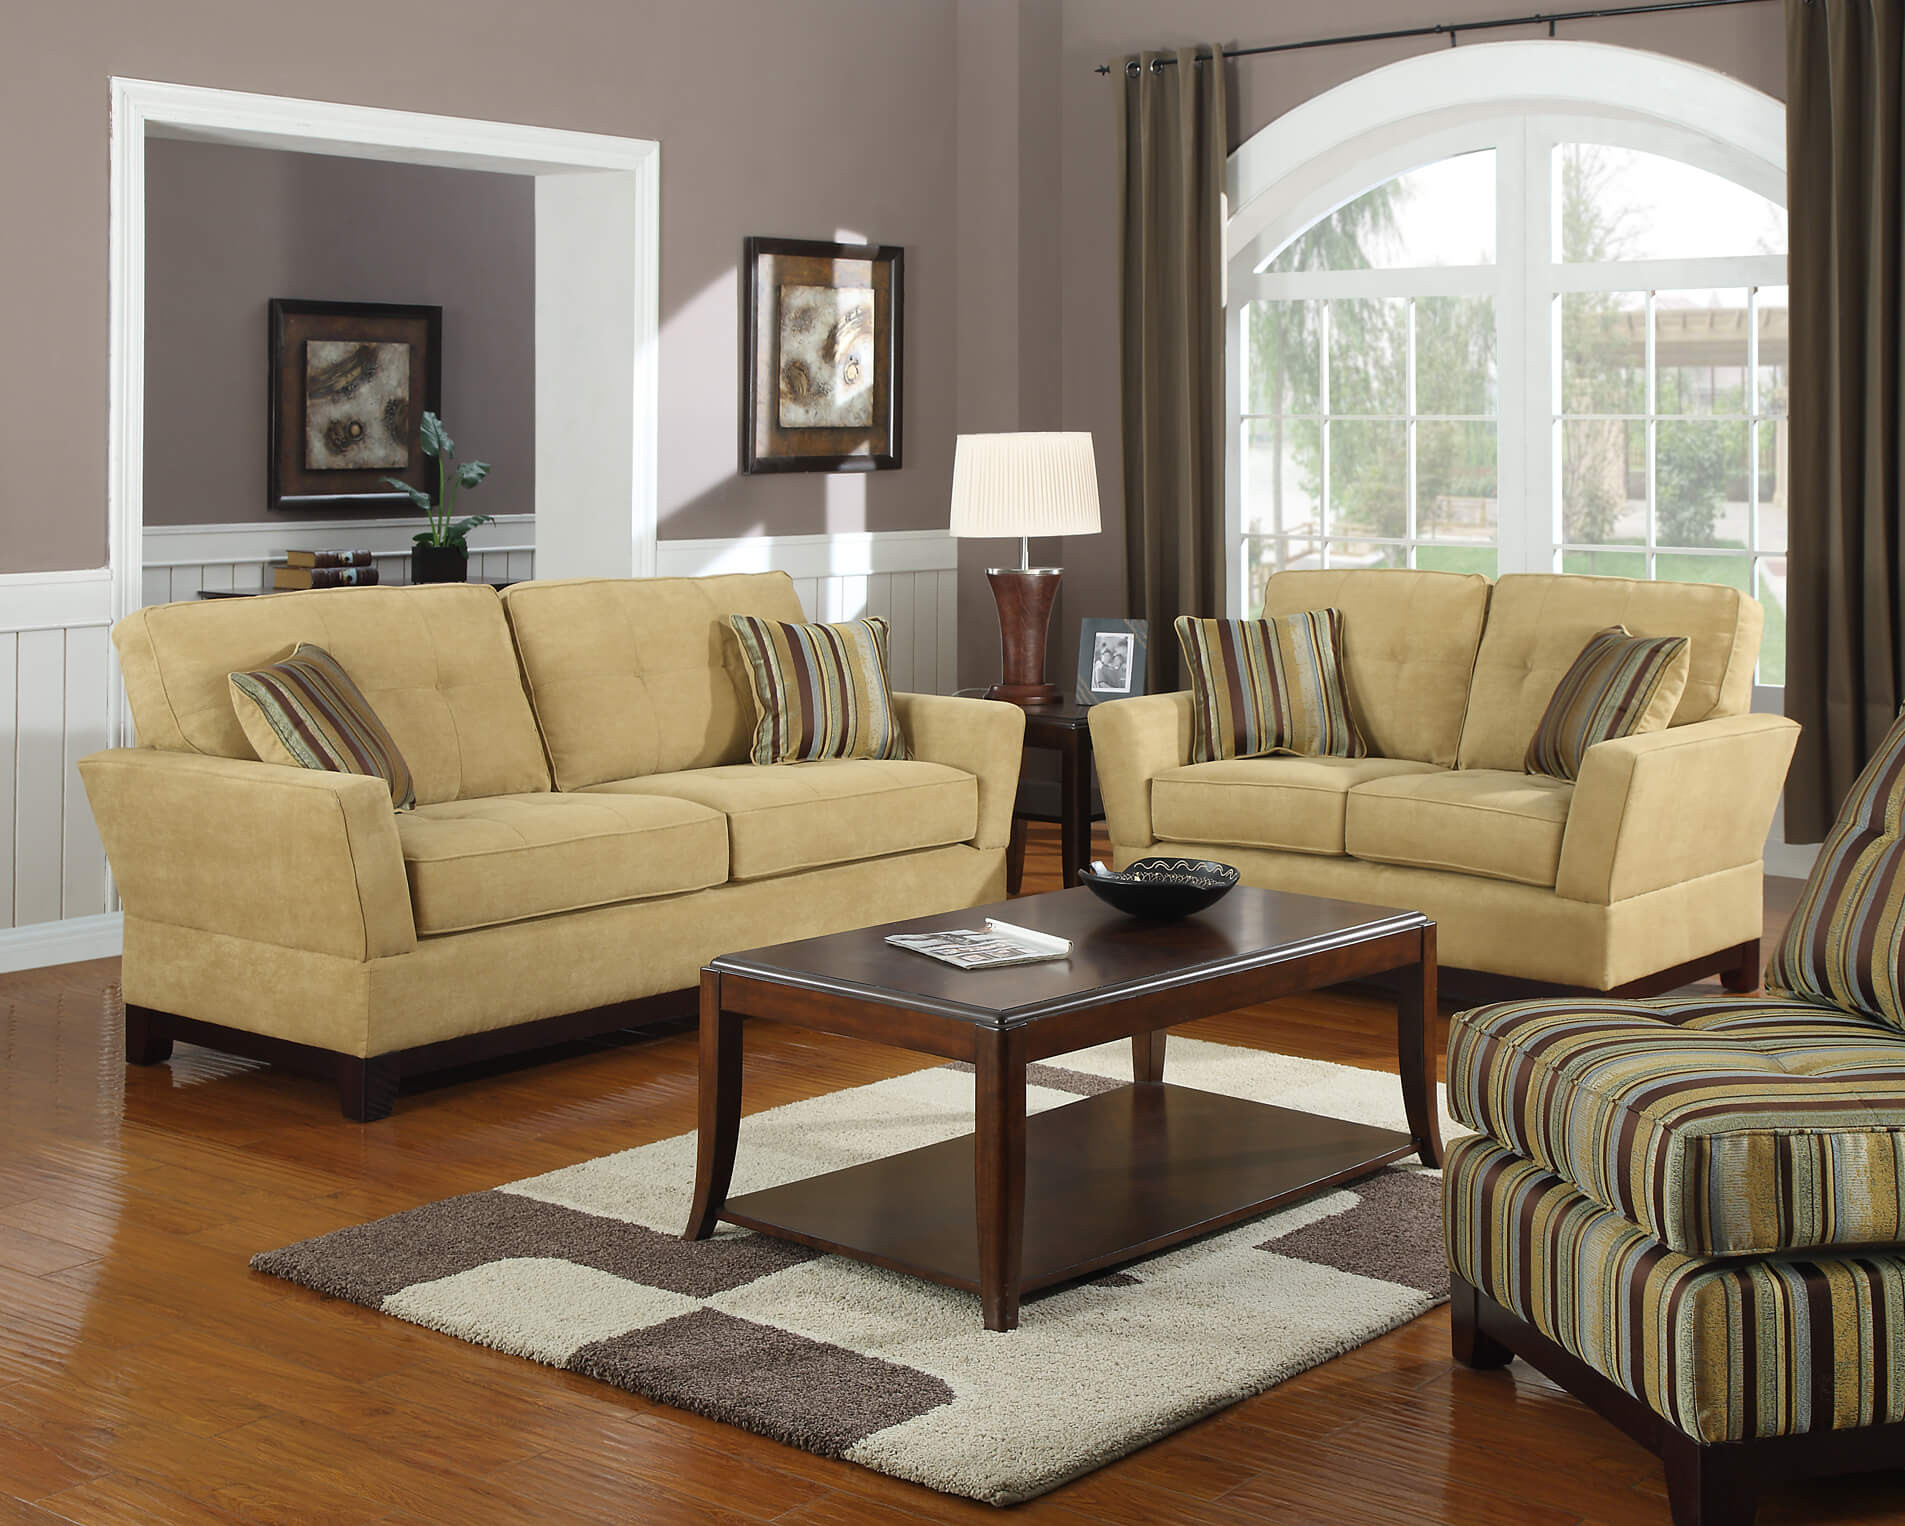 Sofa For Small Living Room
 Simple Way to Decorate Small Living Room with Brown Color